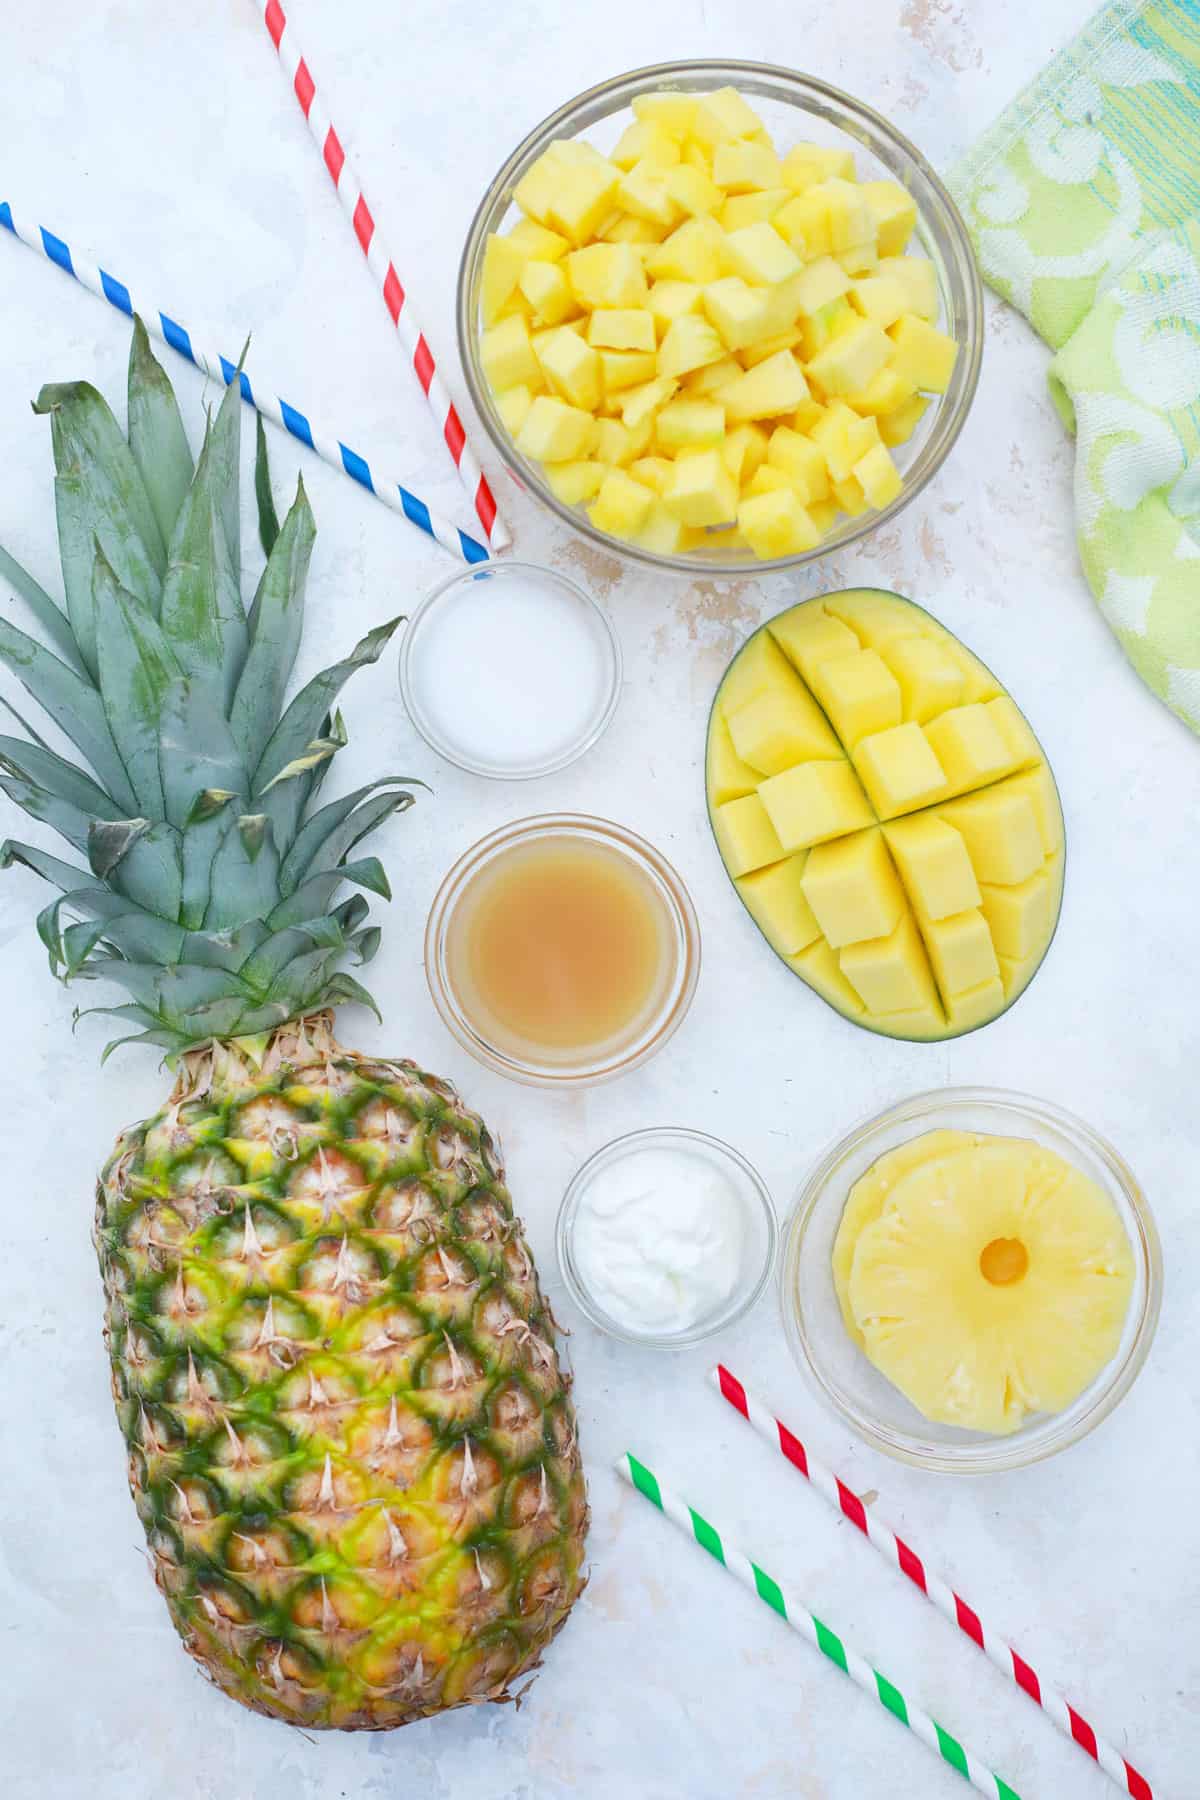 Ingredients for Better Than McDonald's Mango Pineapple Smoothie. 